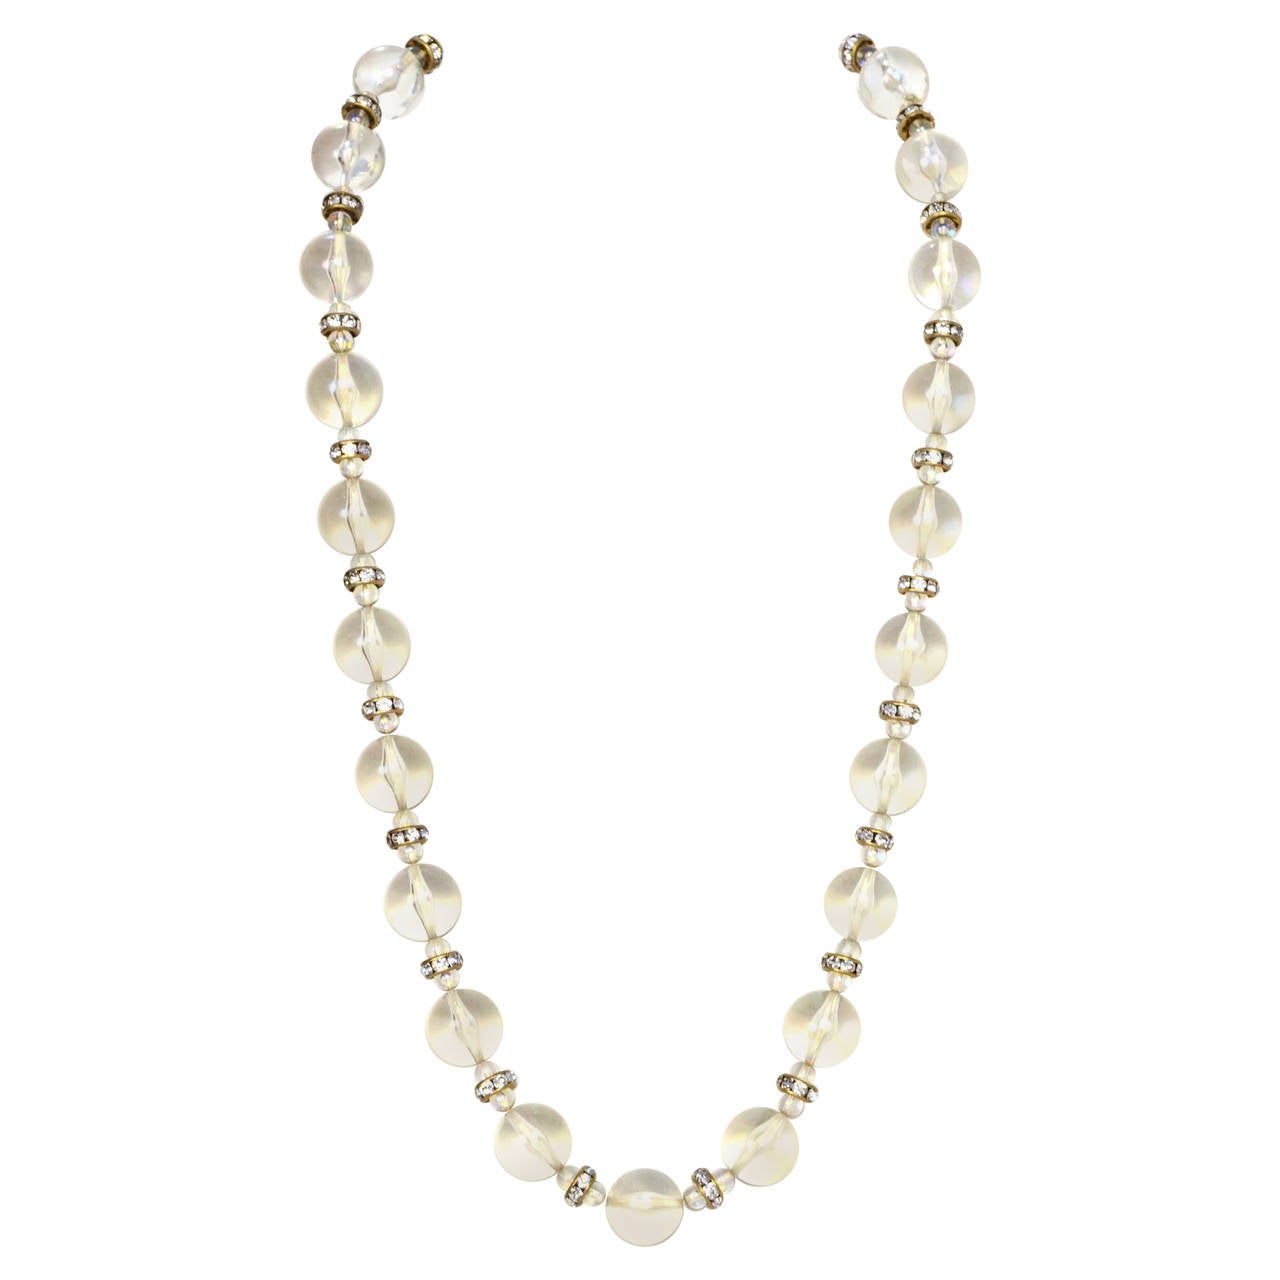 Chanel Vintage '88 Clear Bead & Crystal Necklace

Made in: France
Year of Production: 1988
Stamp: 2 CC 8
Closure: None
Color: Goldtone
Materials: Resin, rhinestones and metal
Overall Condition: Excellent with the exception of tarnishing throughout